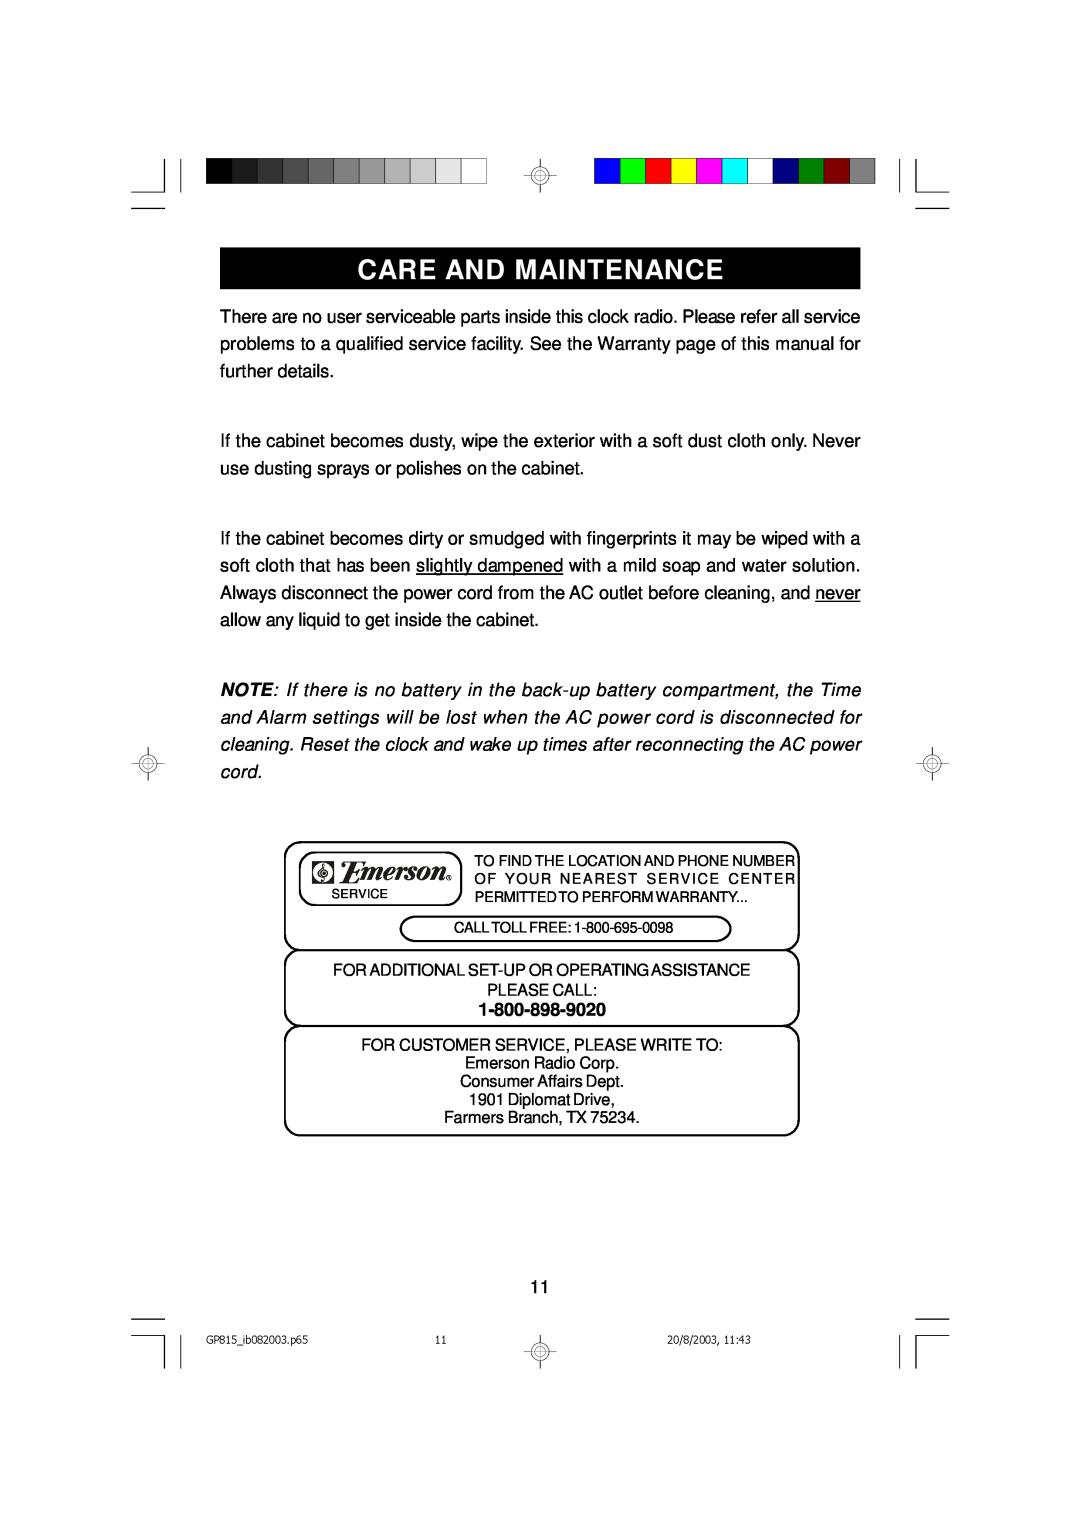 Emerson GP815 owner manual Care And Maintenance, For Additional Set-Up Or Operating Assistance Please Call 